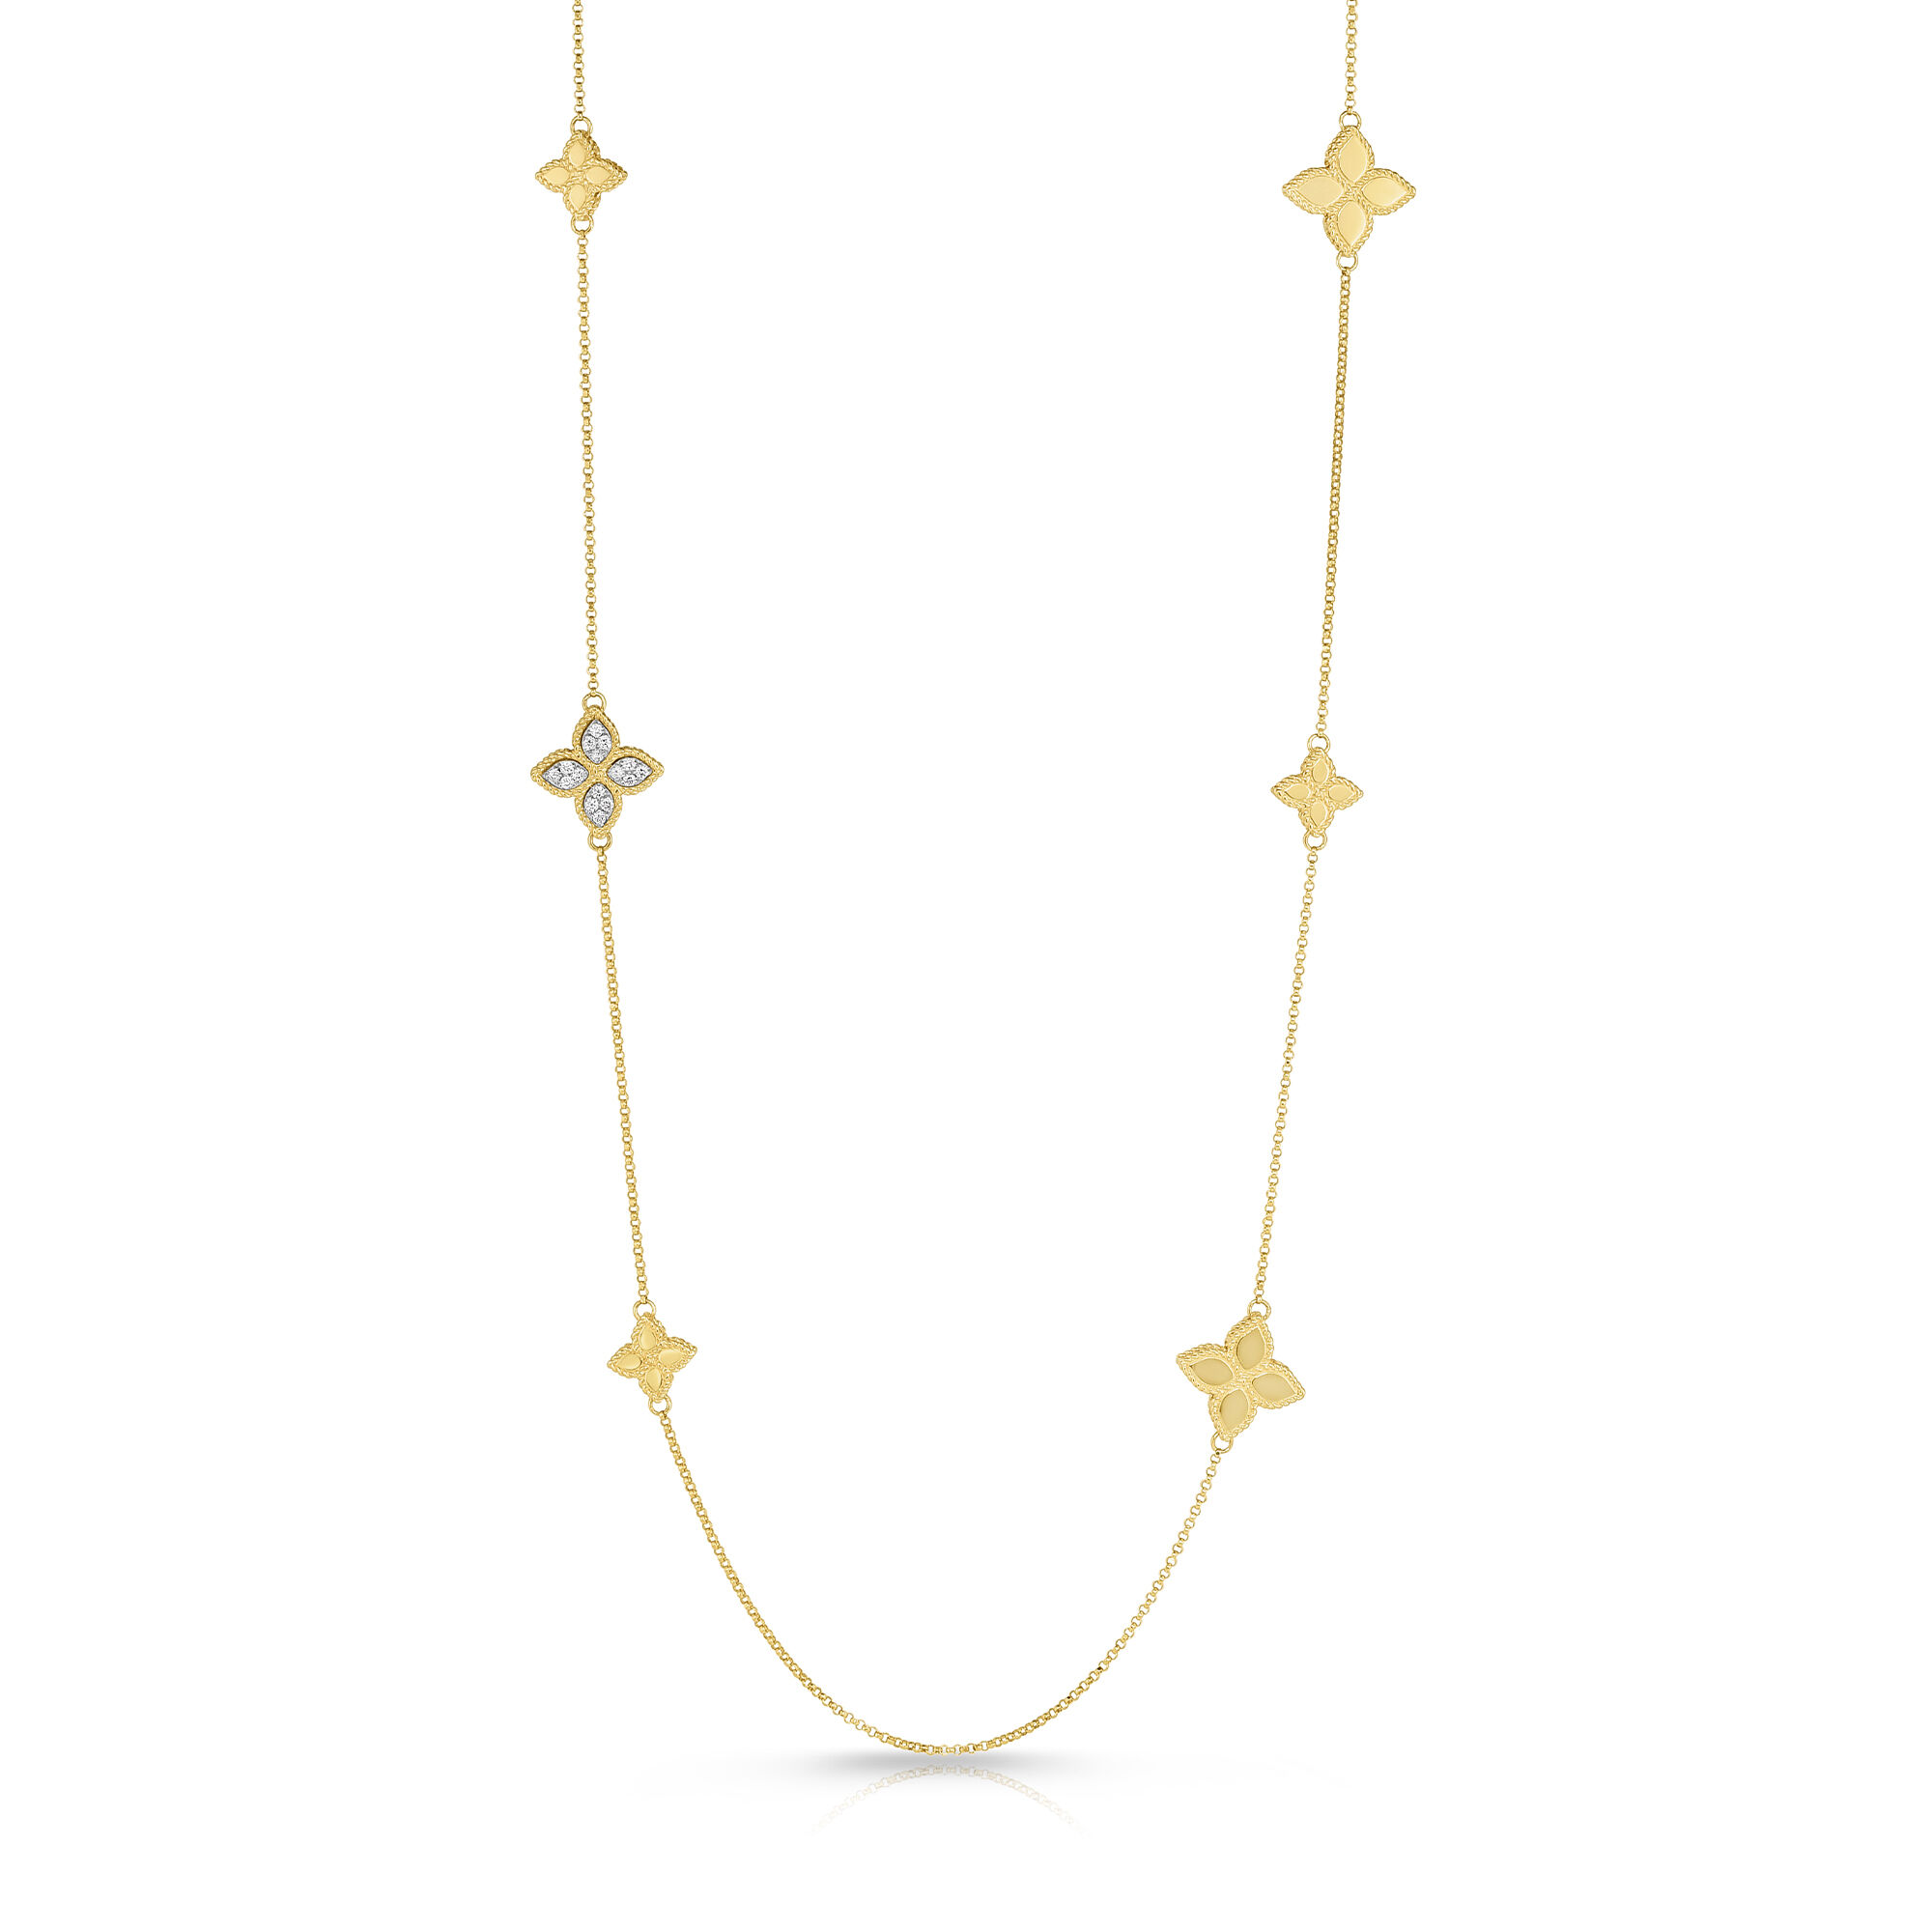 Princess Flower Yellow Gold and Diamond 6 Station Necklace 